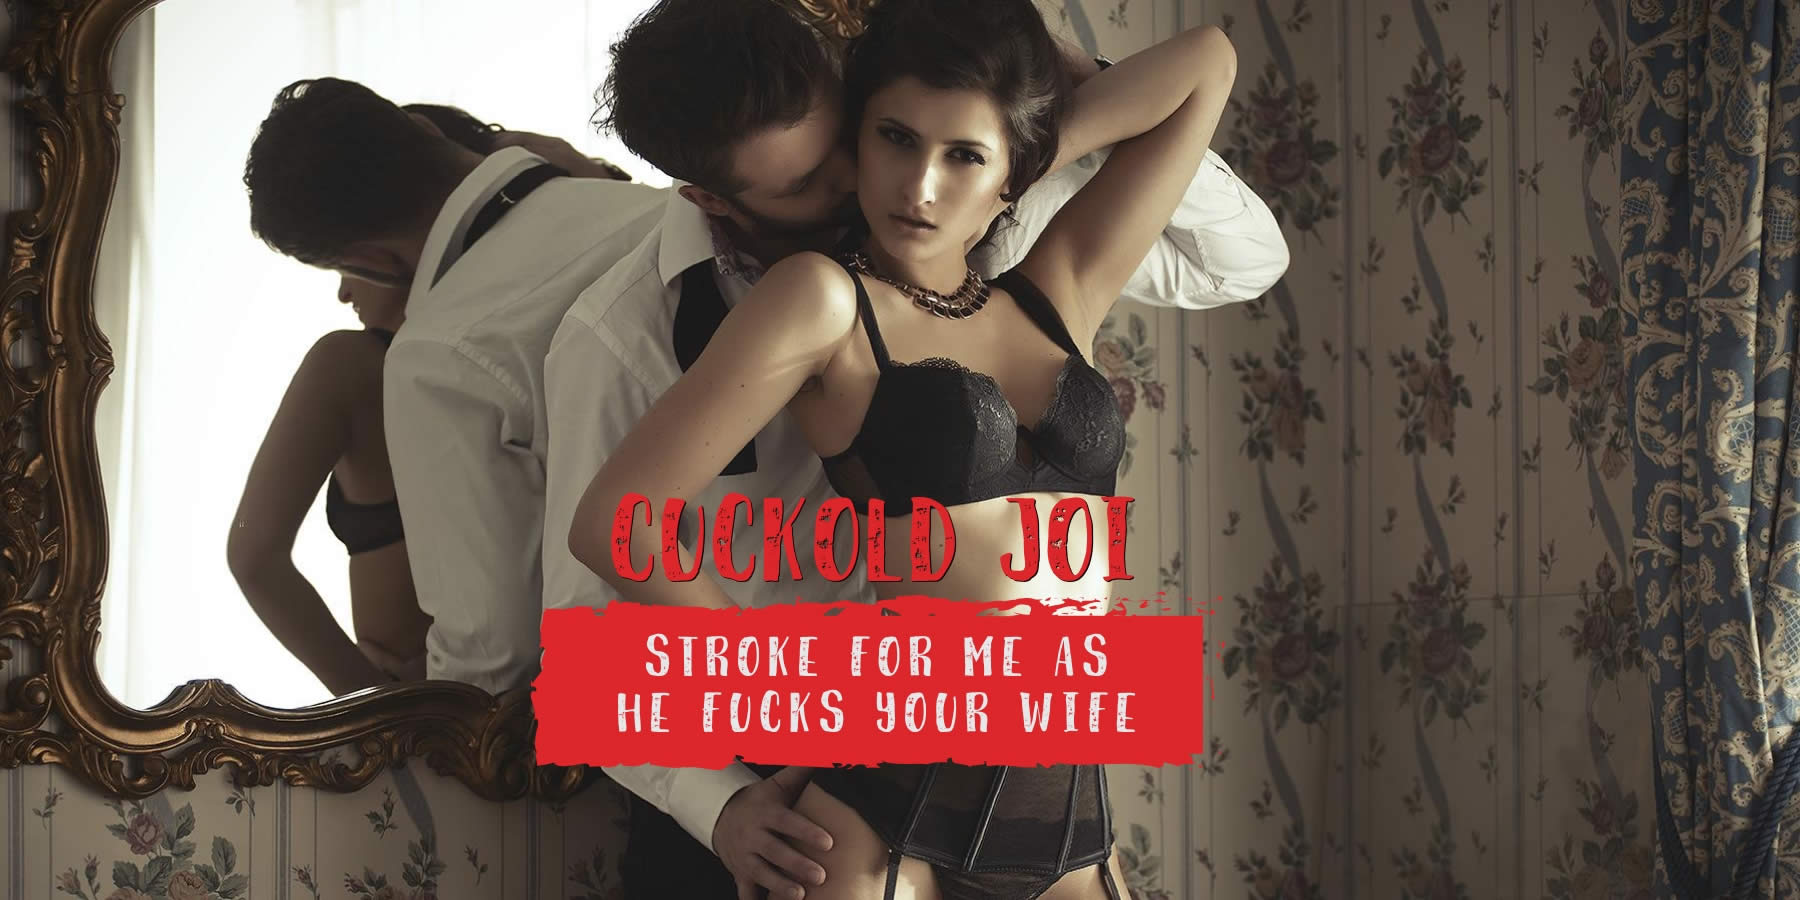 Uncle C. reccomend become cuckold